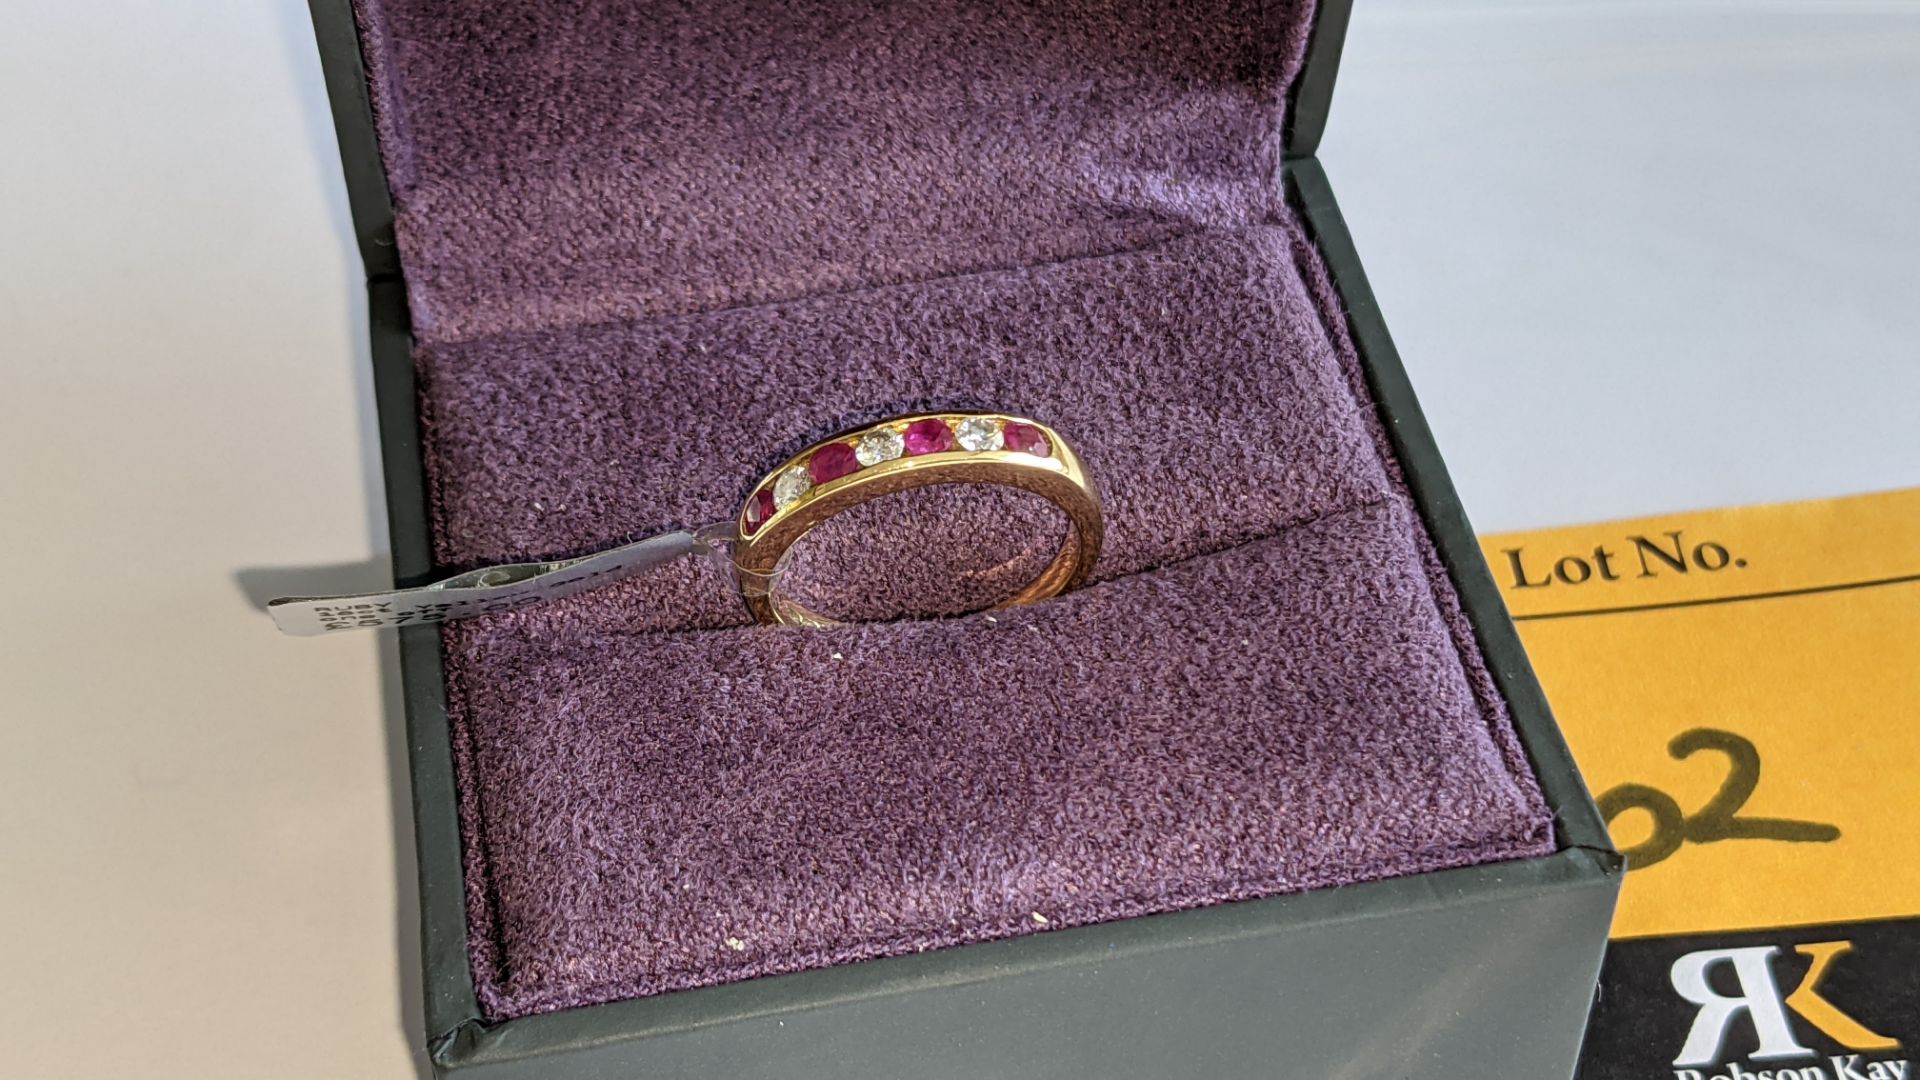 18ct yellow gold ring with rubies & what are assumed to be diamonds. RRP £575 - Image 3 of 14